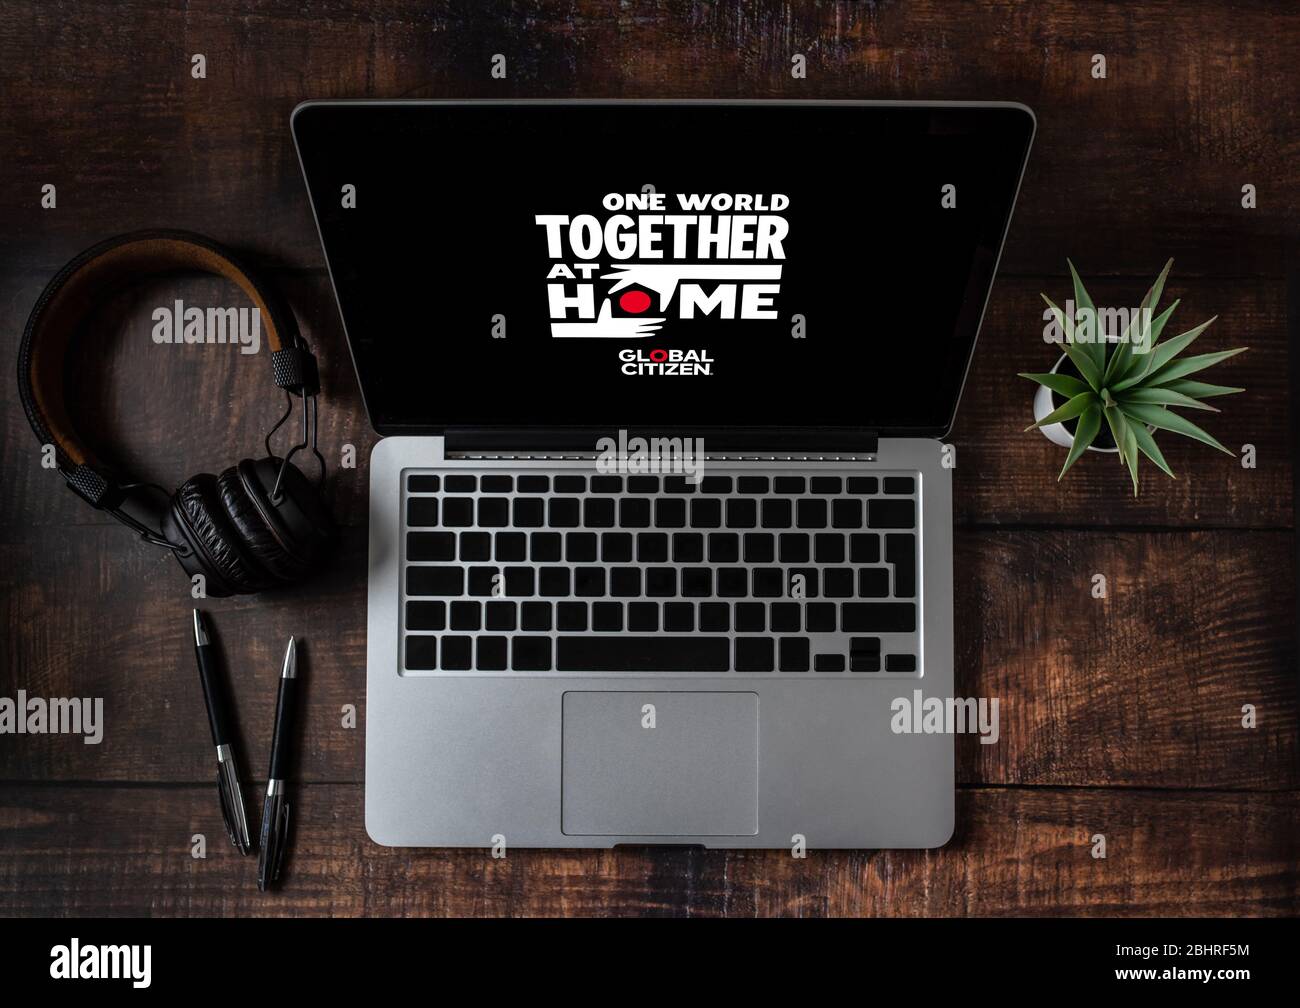 Antalya, TURKEY - April 18, 2020. Laptop showing Global Citizen One World Together at Home concert logo. Stock Photo